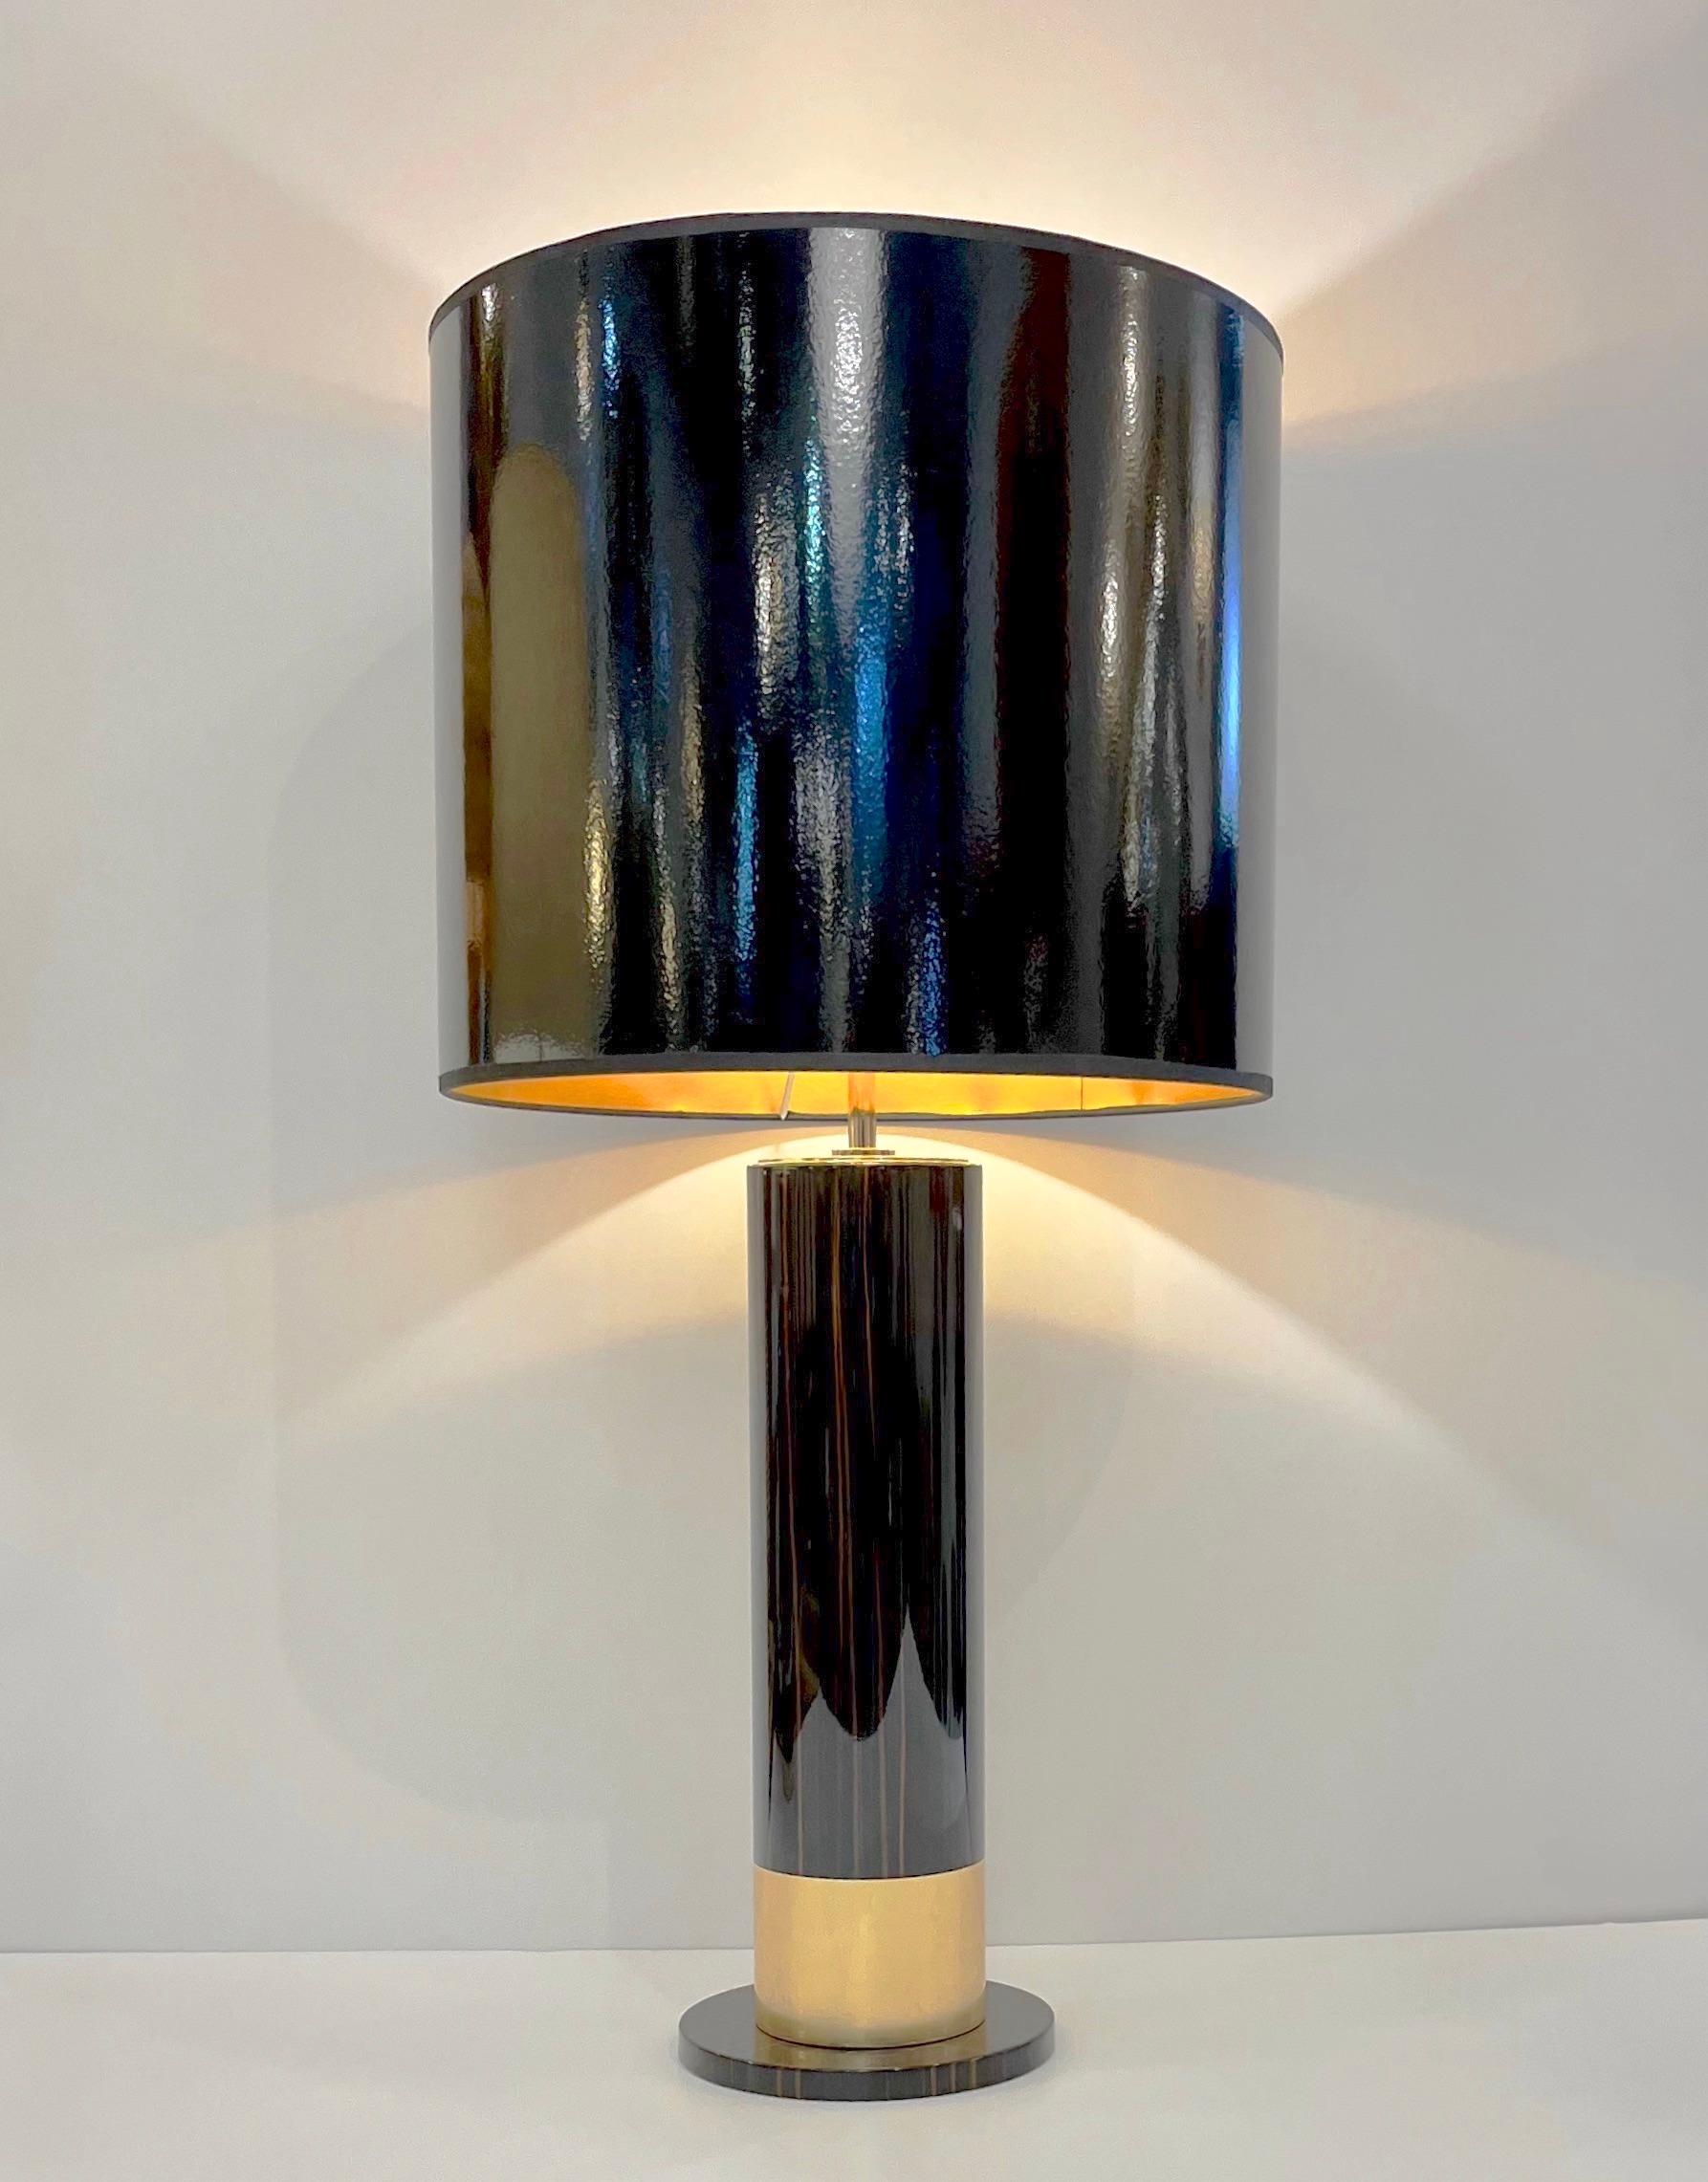 A contemporary pair of tall glamorous Hollywood regency design lamps, handmade in black and gold, high quality of execution with a sleek and modern mirror-like finish, the stem as an Art Deco column is highlighted with gold brown and black streak